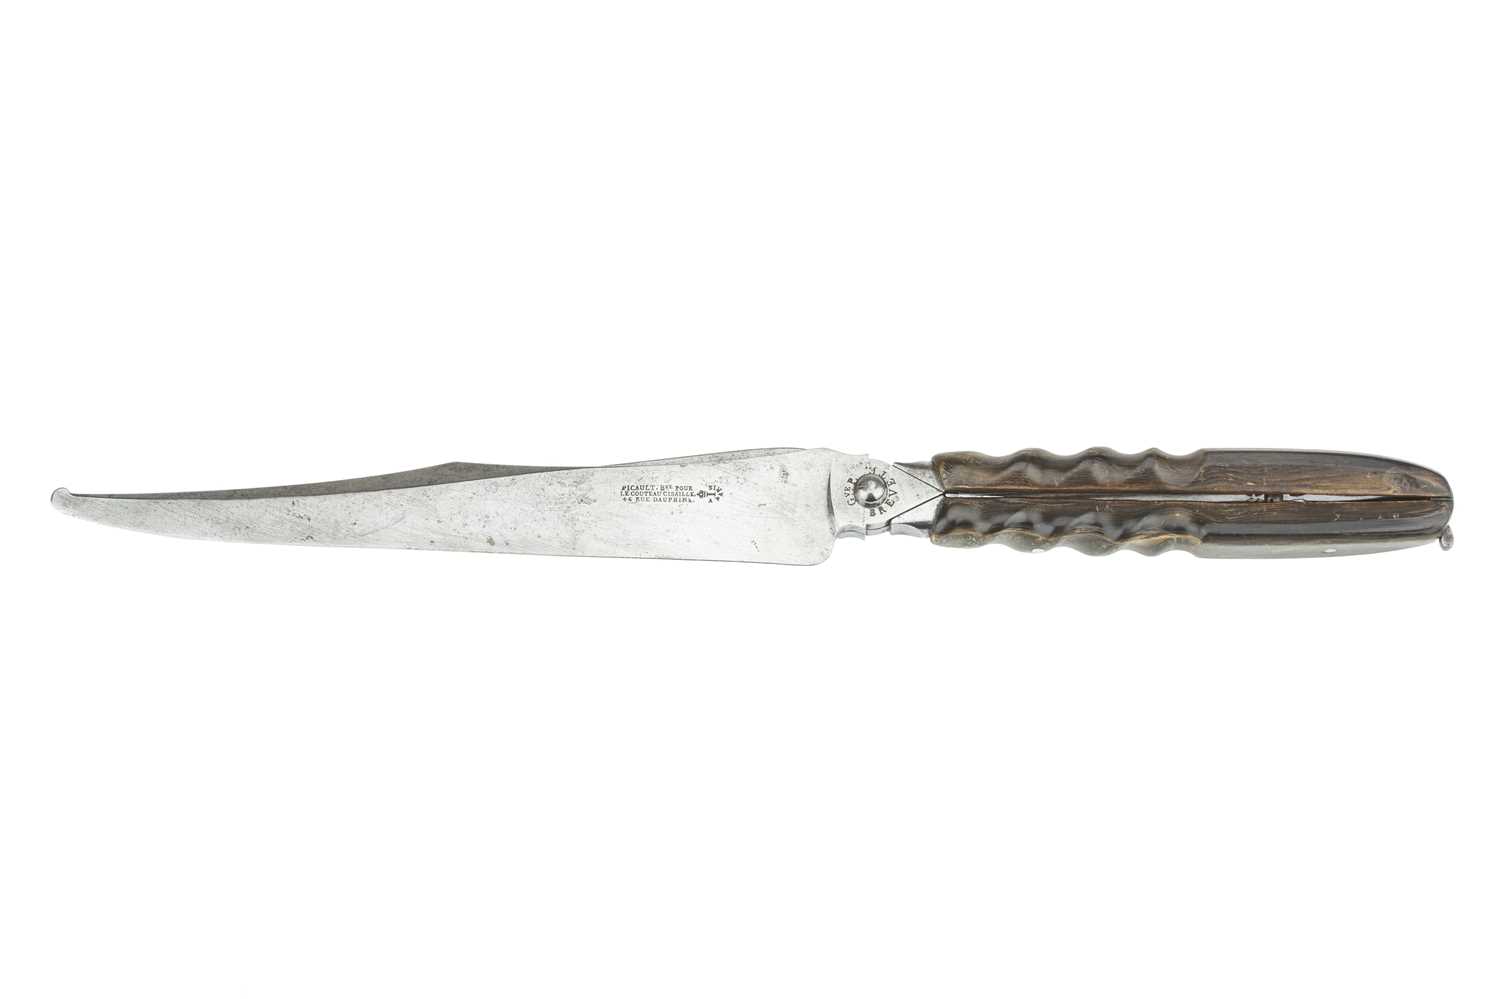 Lot 21 - Surgical Instruments, A Dissection Scissor Knife